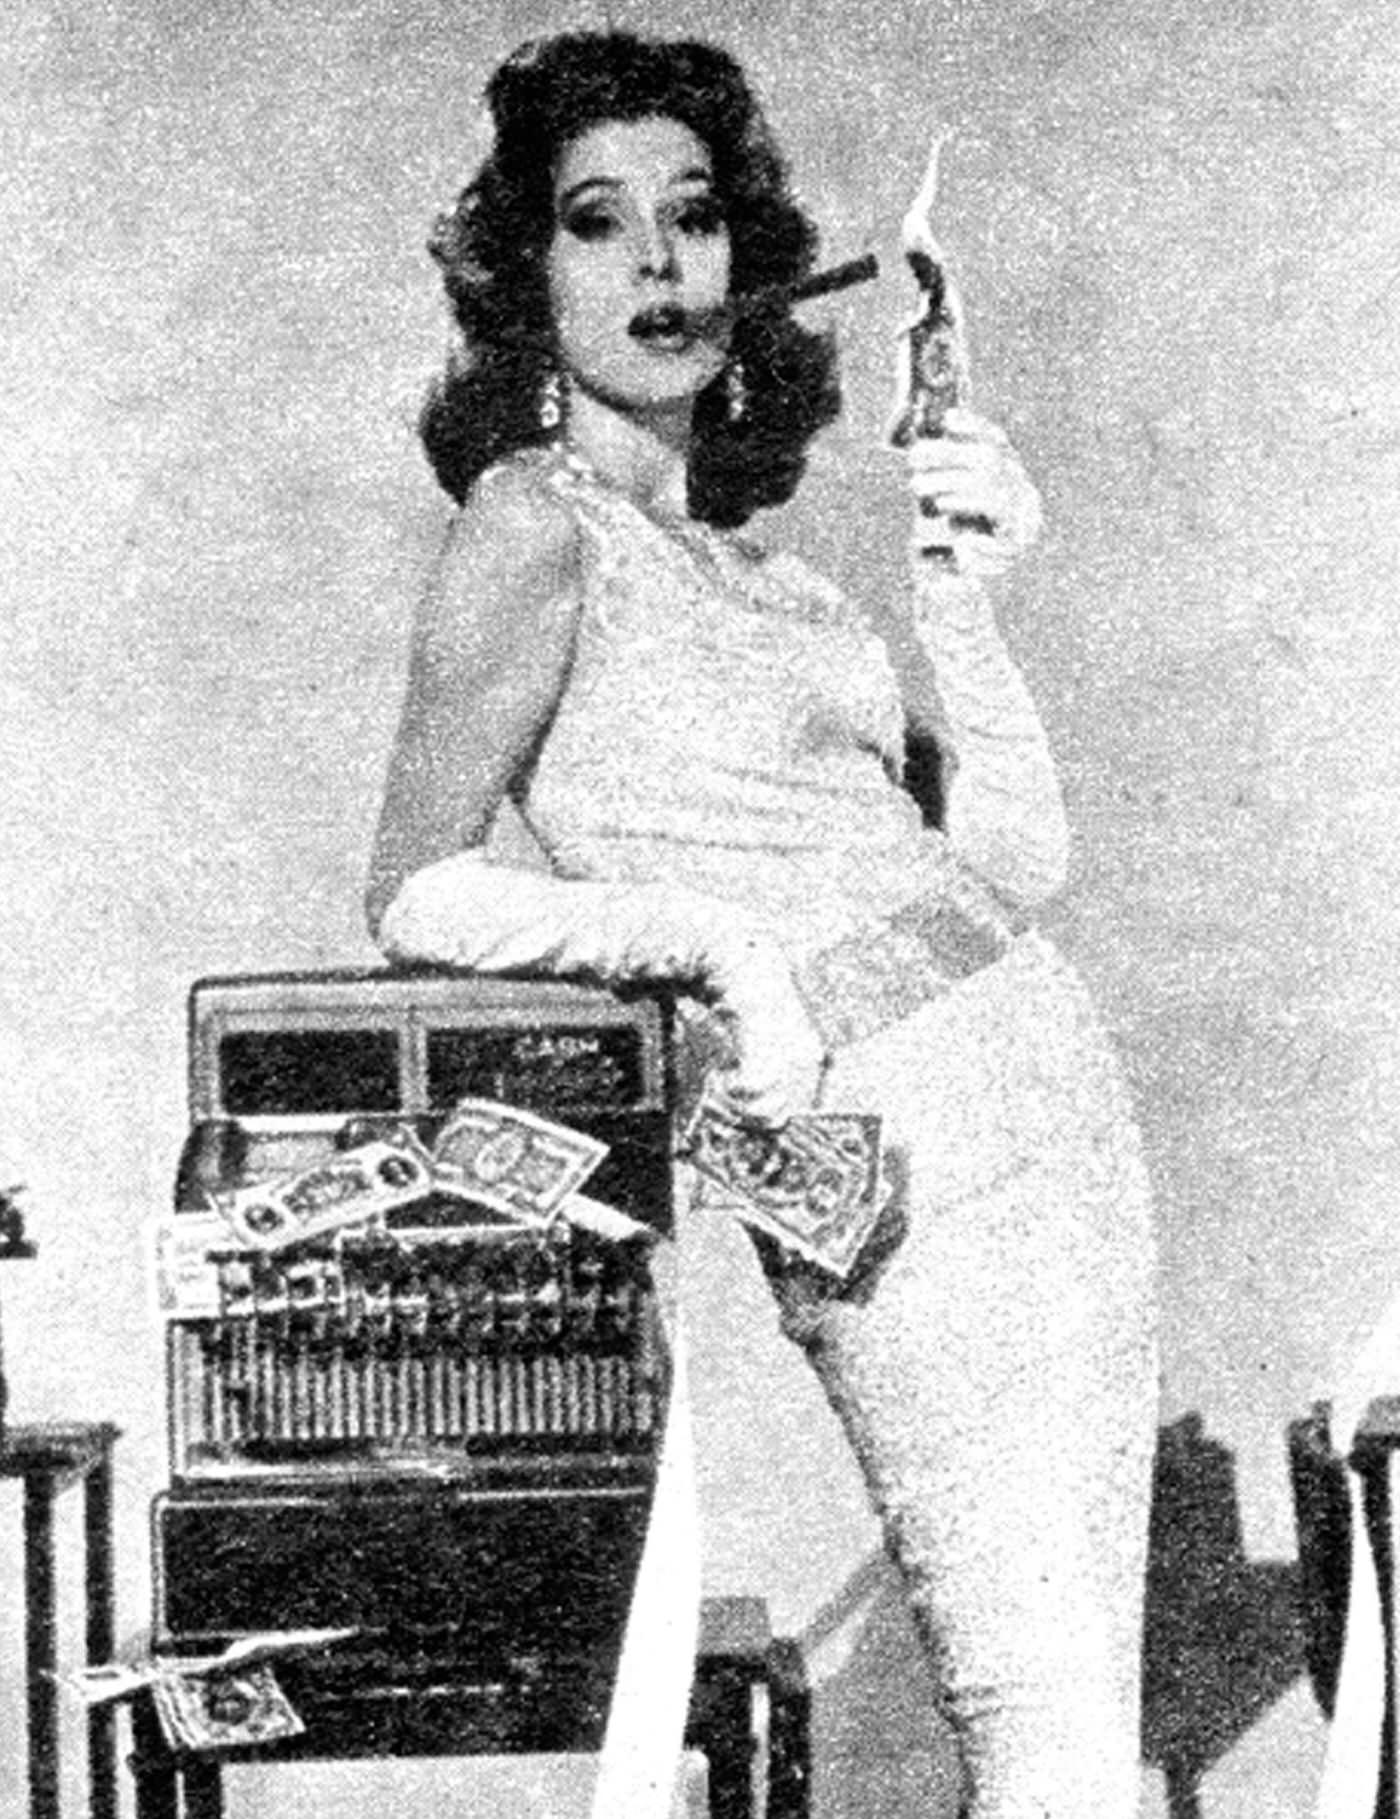 Suzy Parker Poses as Glamorous Diva to Promote 'The Interns,' Los Angeles, 1961